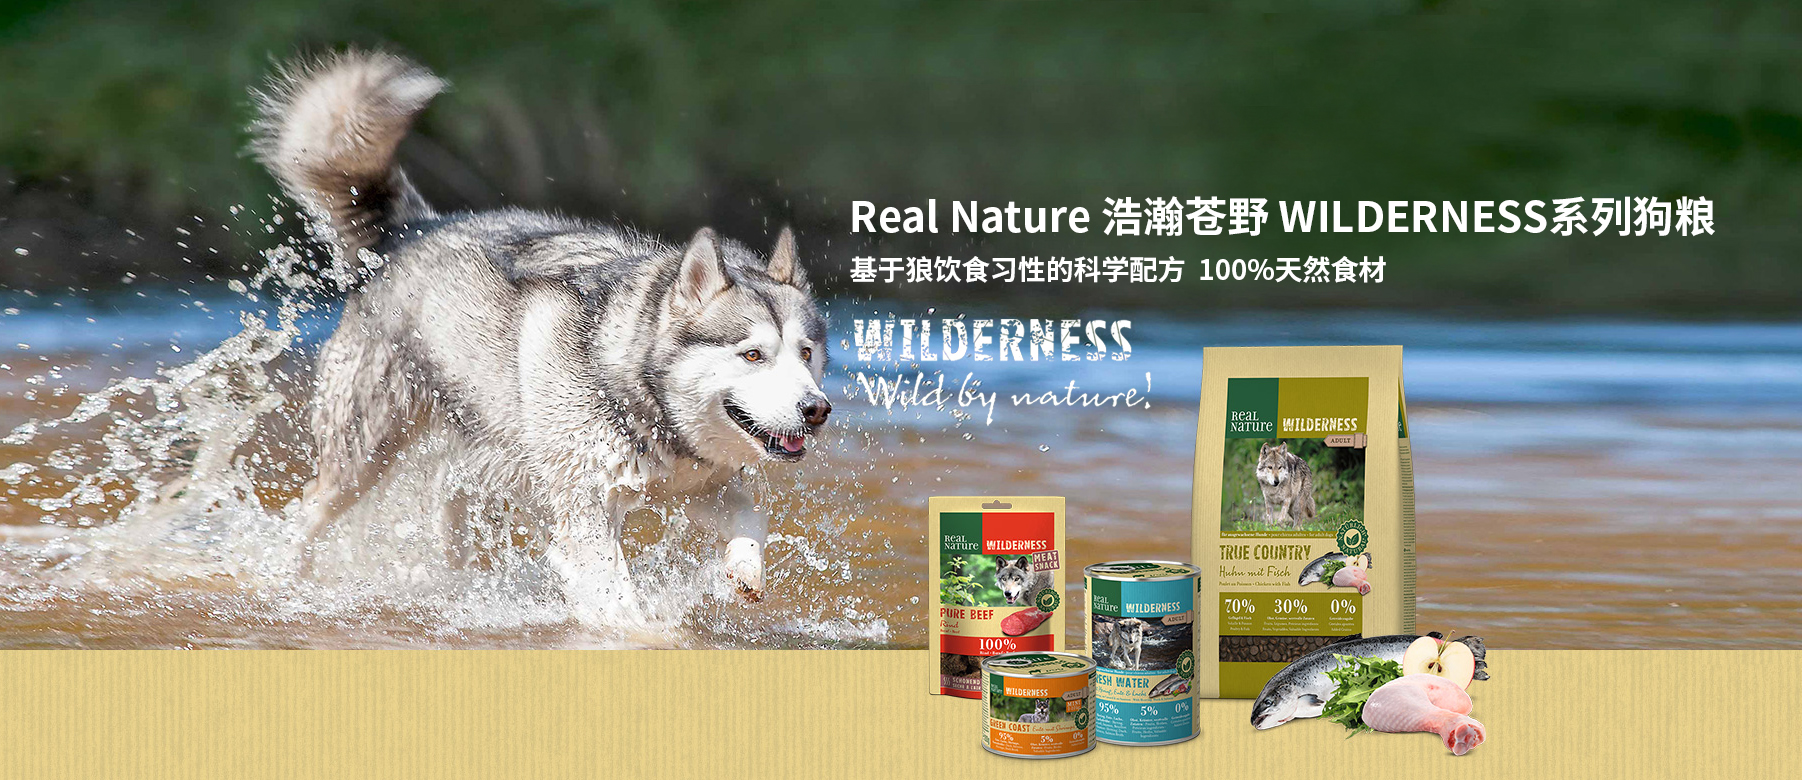 Real Nature浩瀚苍野 Wilderness 系列